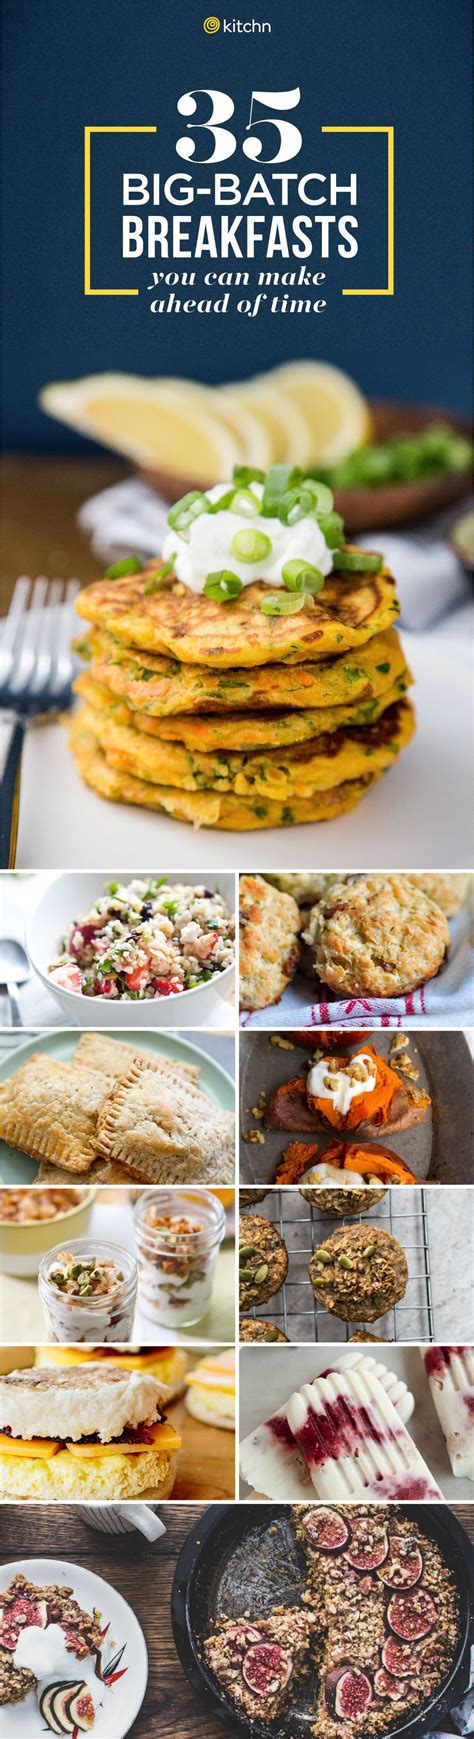 30 Big Batch Breakfasts You Can Make Ahead Of Time Brunch Recipes